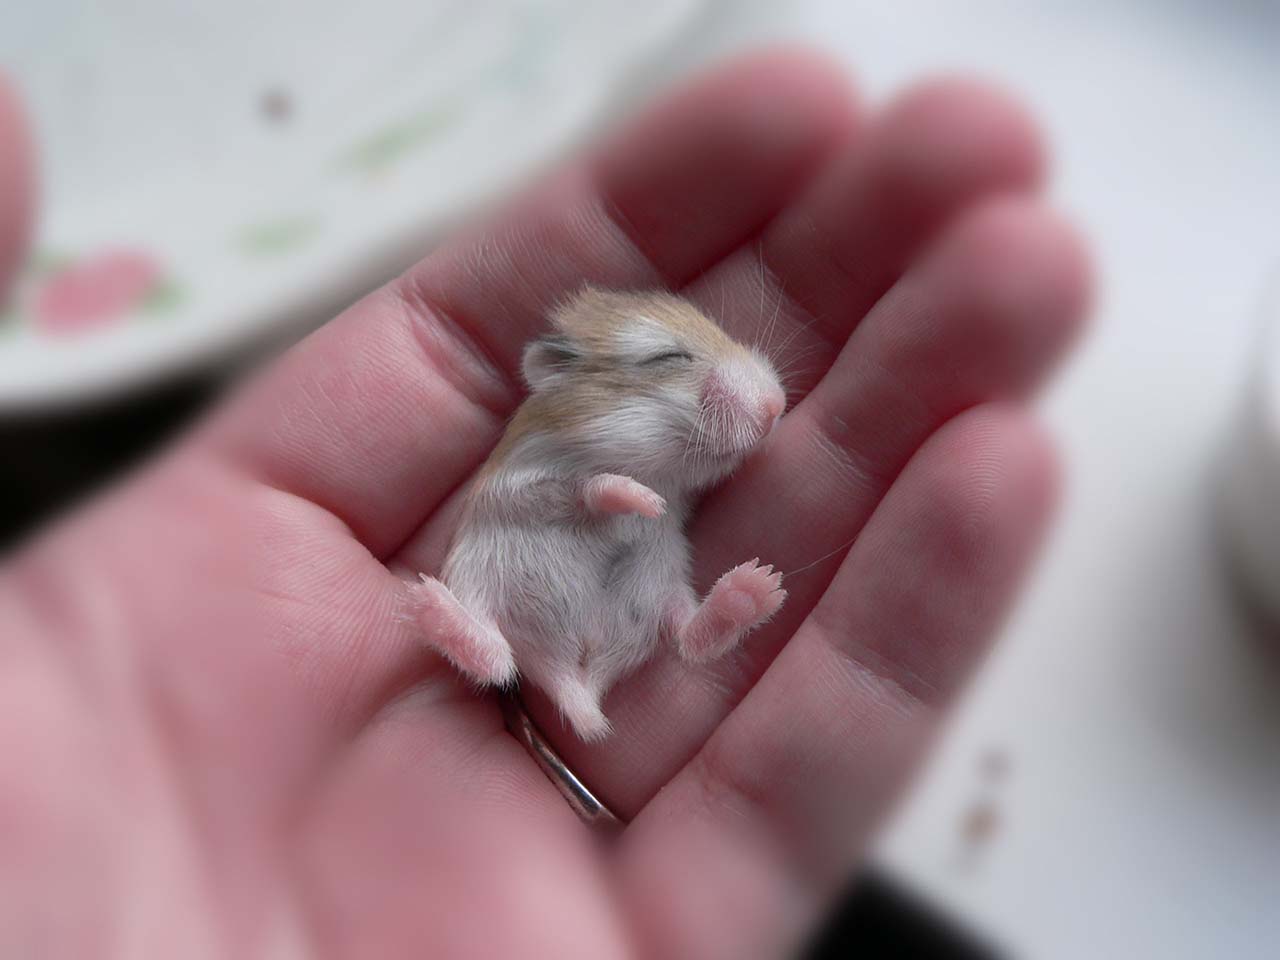 27 Adorable & Tiny Animals That Are Too Cute To Handle #21: Rat